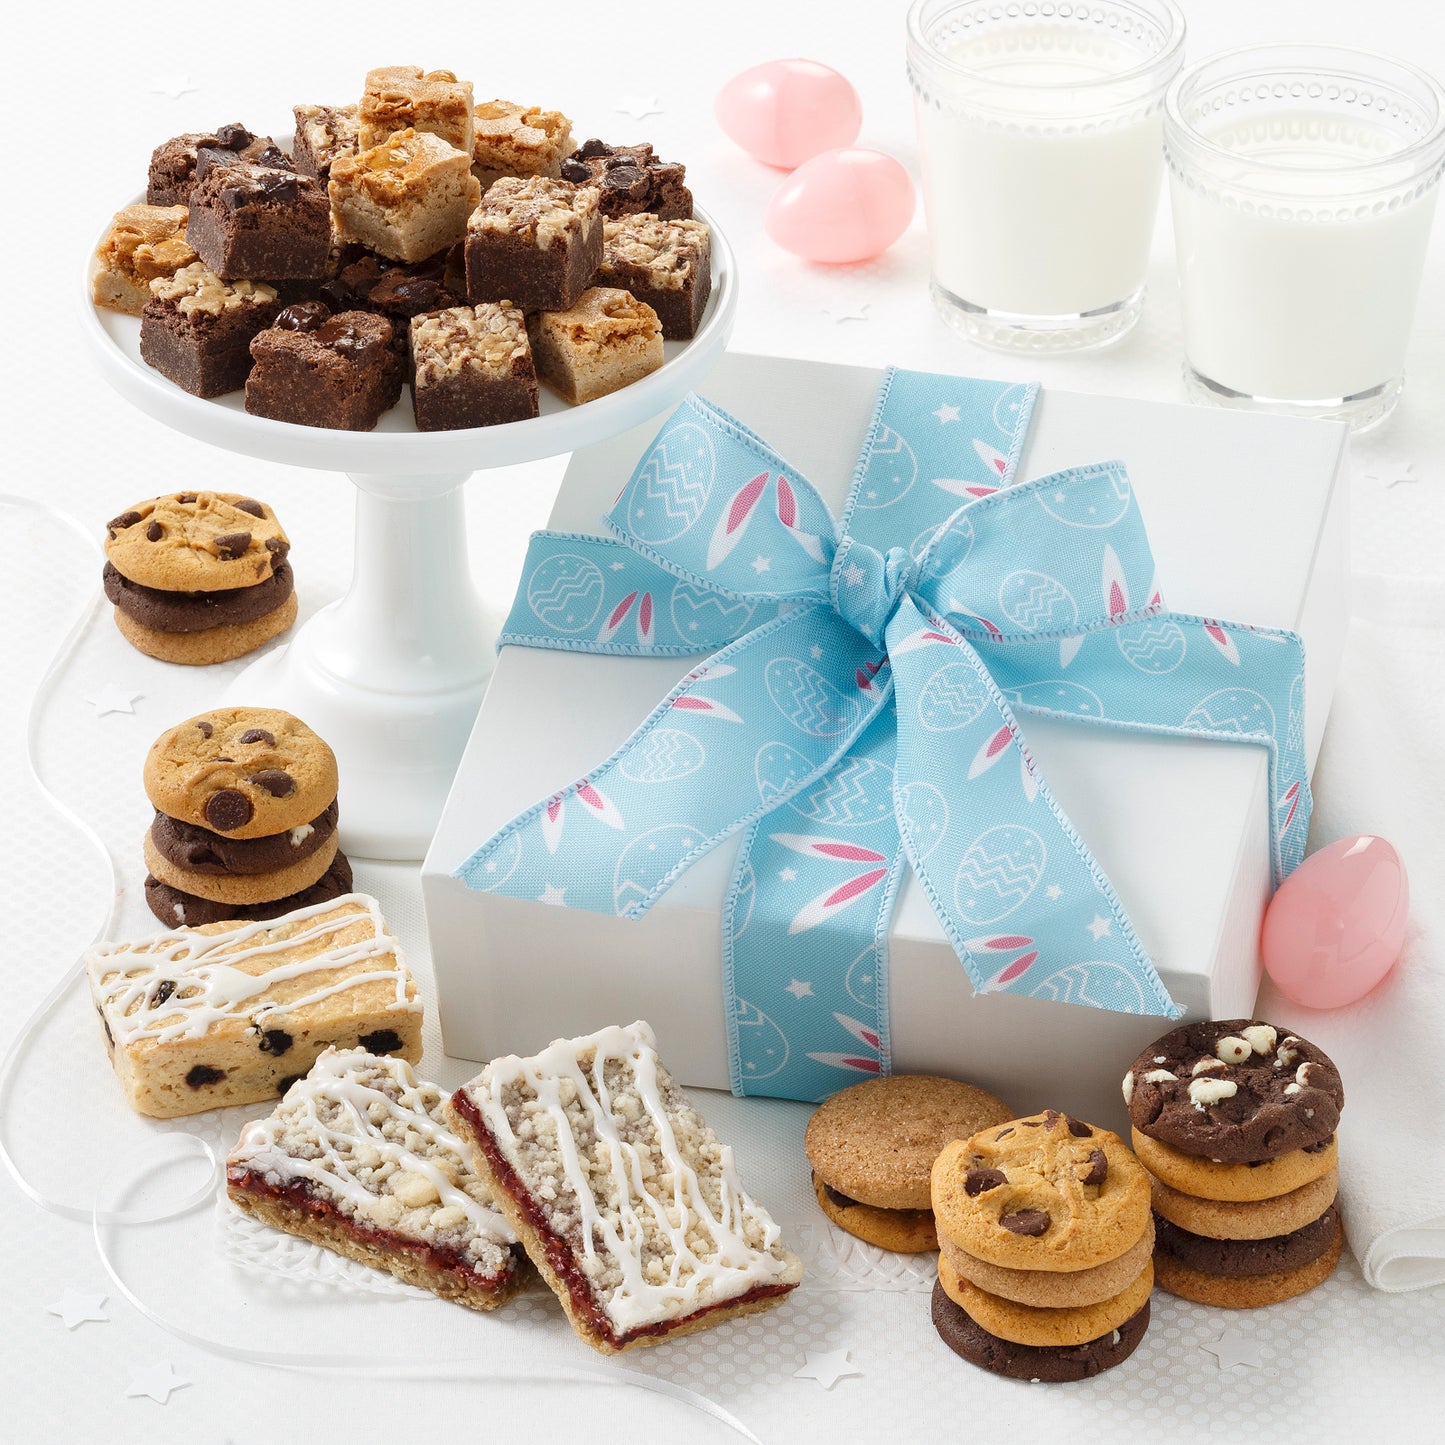 A white gift box tied with a light blue ribbon decorated with bunny ears and surrounded by an assortment of nibblers, brownie bites, and fruit bars